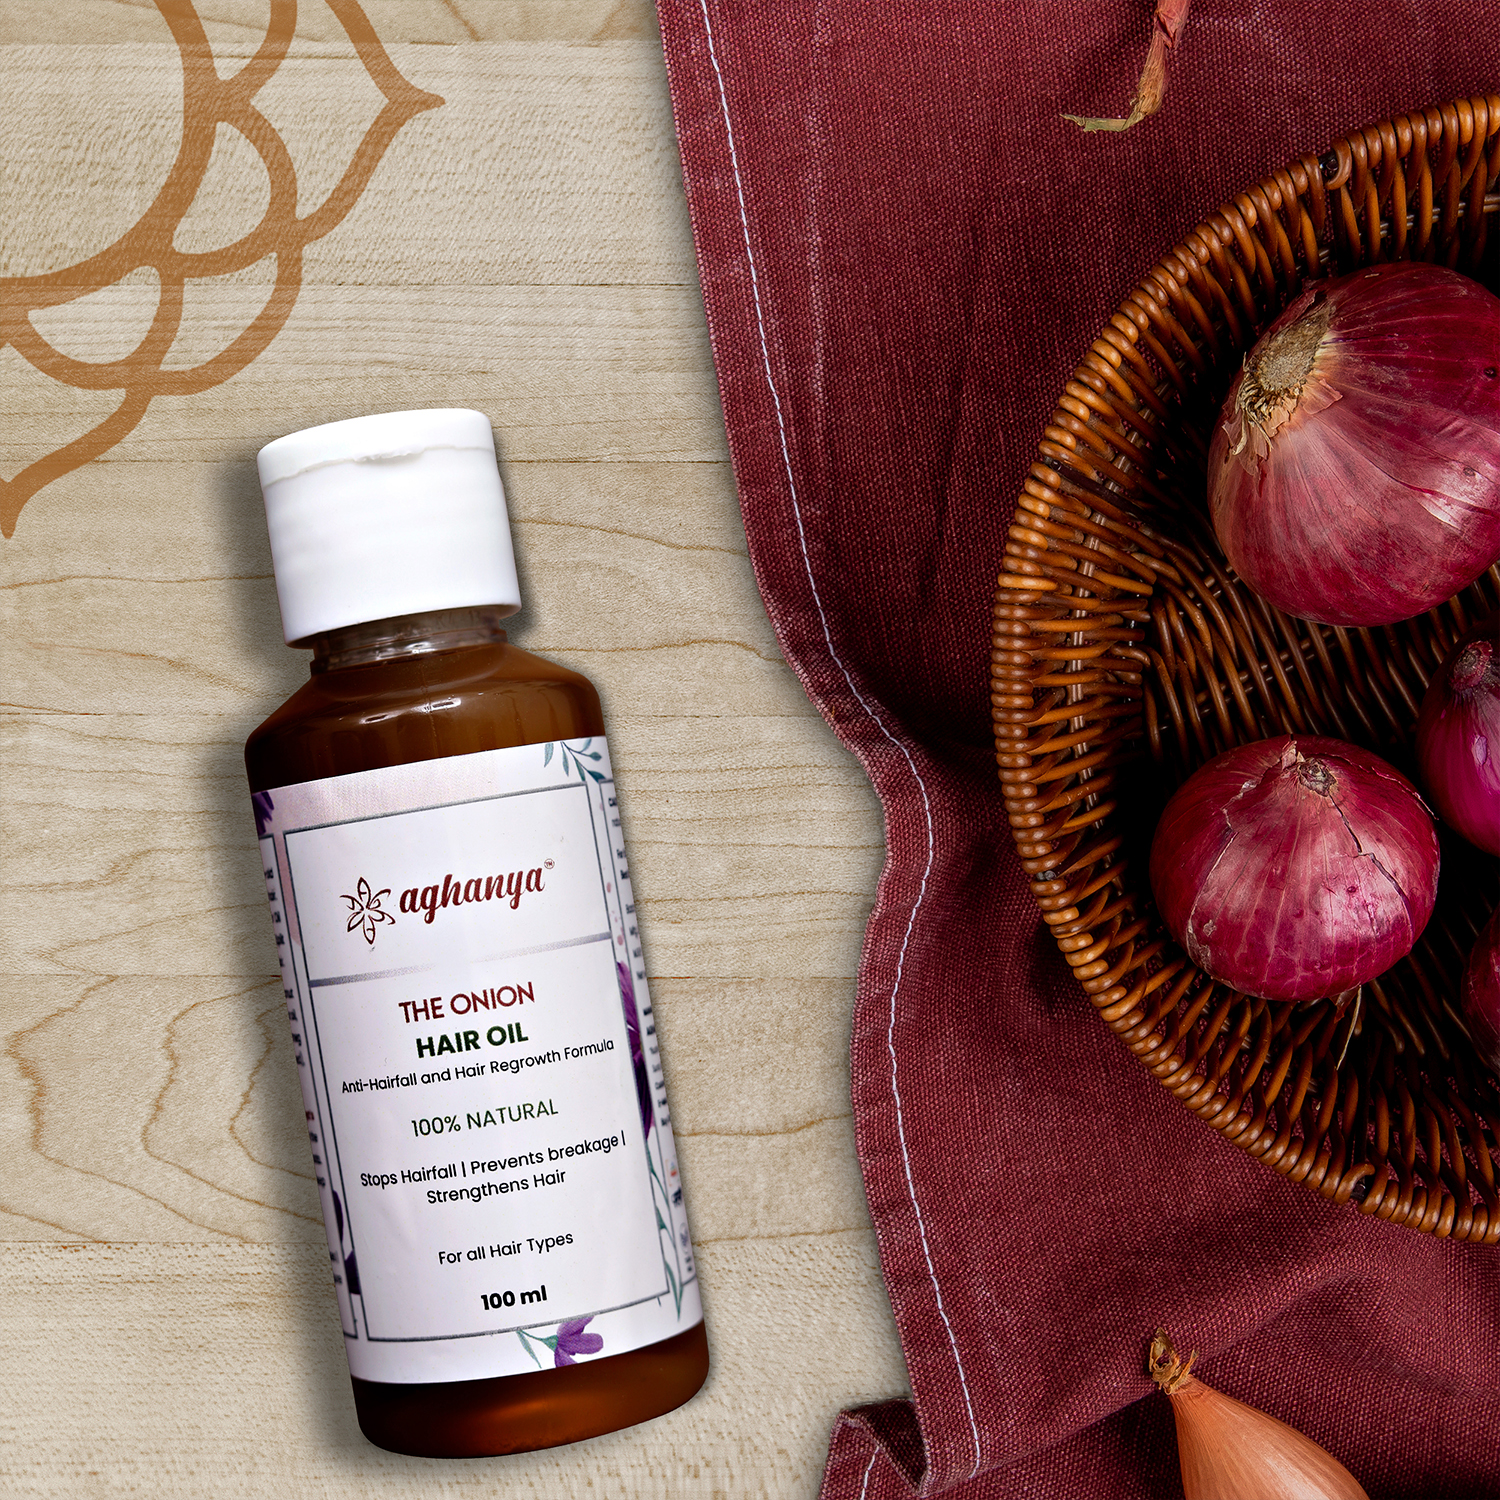 Buy Red Onion Hair Oil Regal Essence Online  Best Price Upto 50 Off   VedapureNaturals